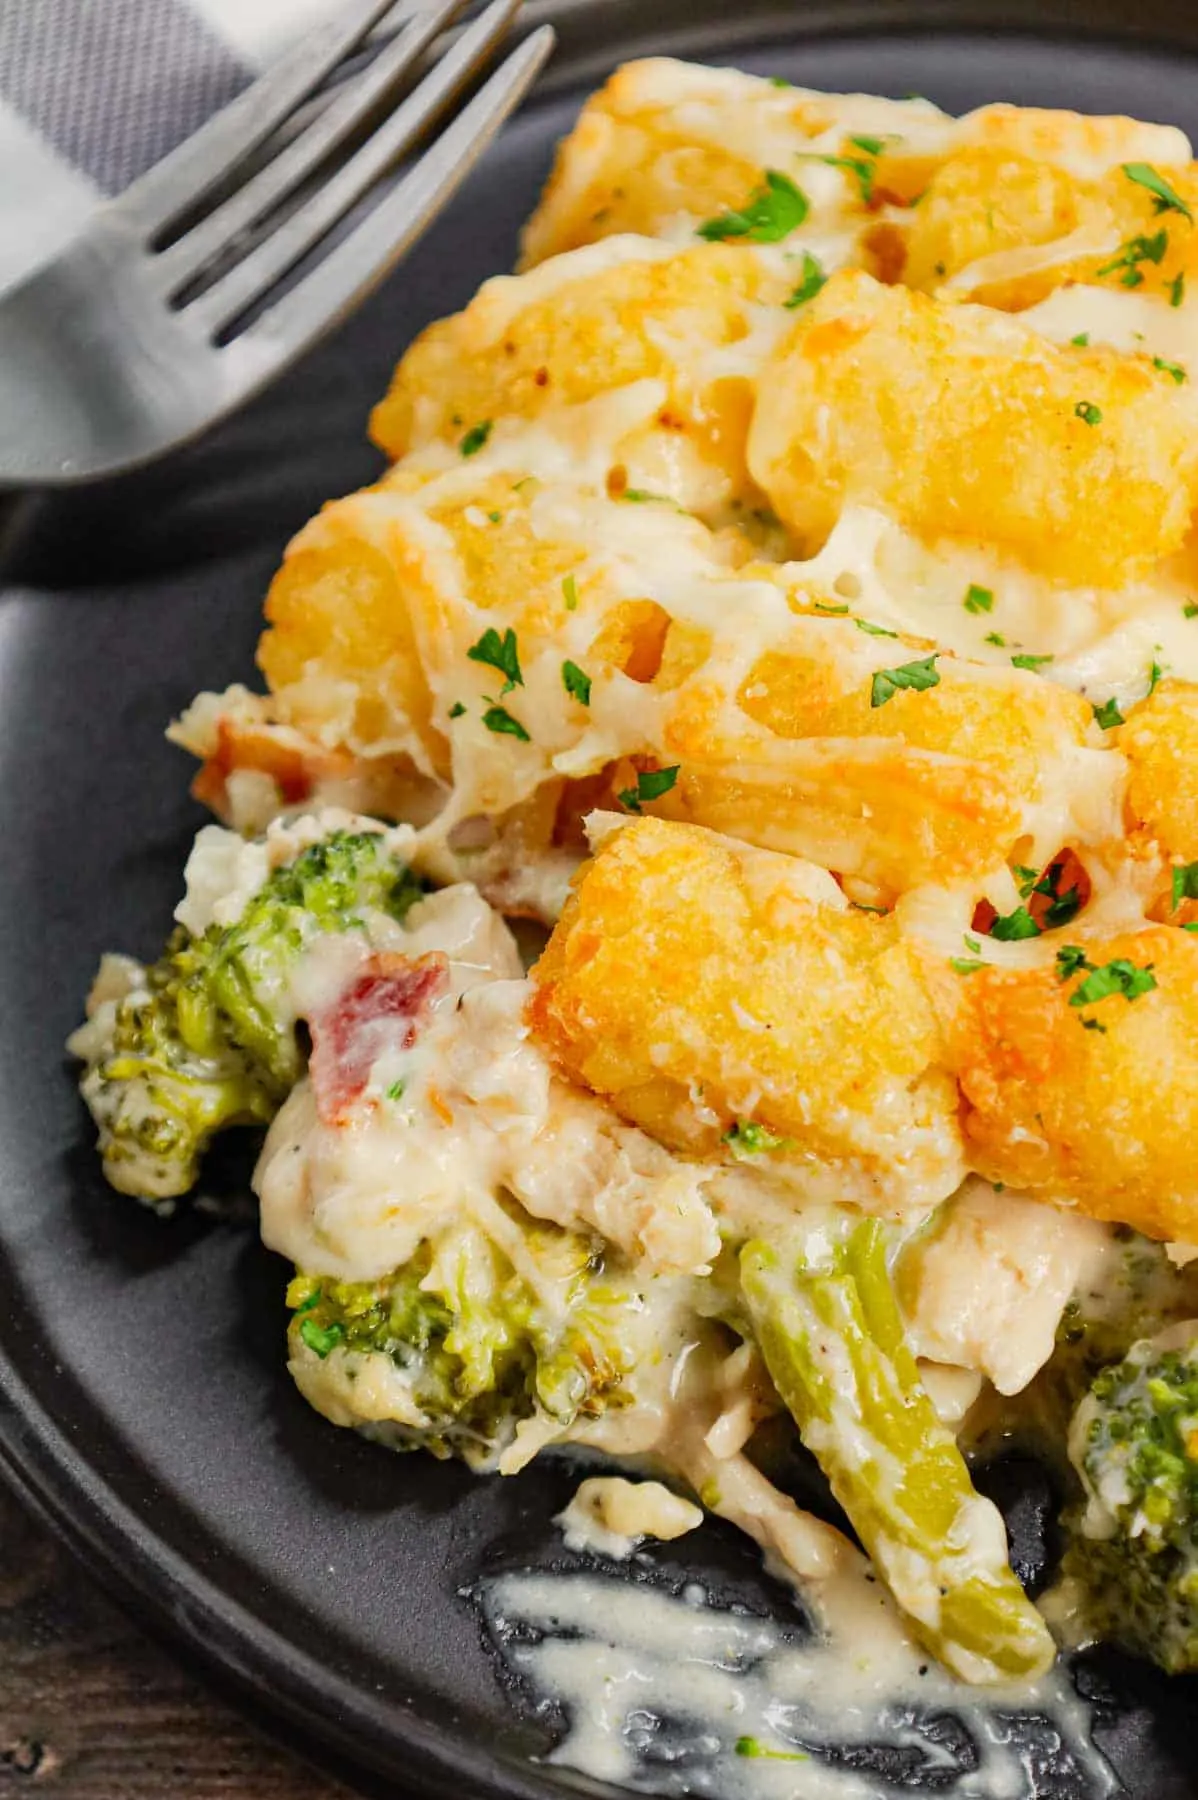 Chicken Alfredo Tater Tot Casserole is a hearty dish loaded with shredded rotisserie chicken, chopped bacon, broccoli, Alfredo sauce, parmesan and mozzarella topped with tater tots baked until golden brown and crispy.